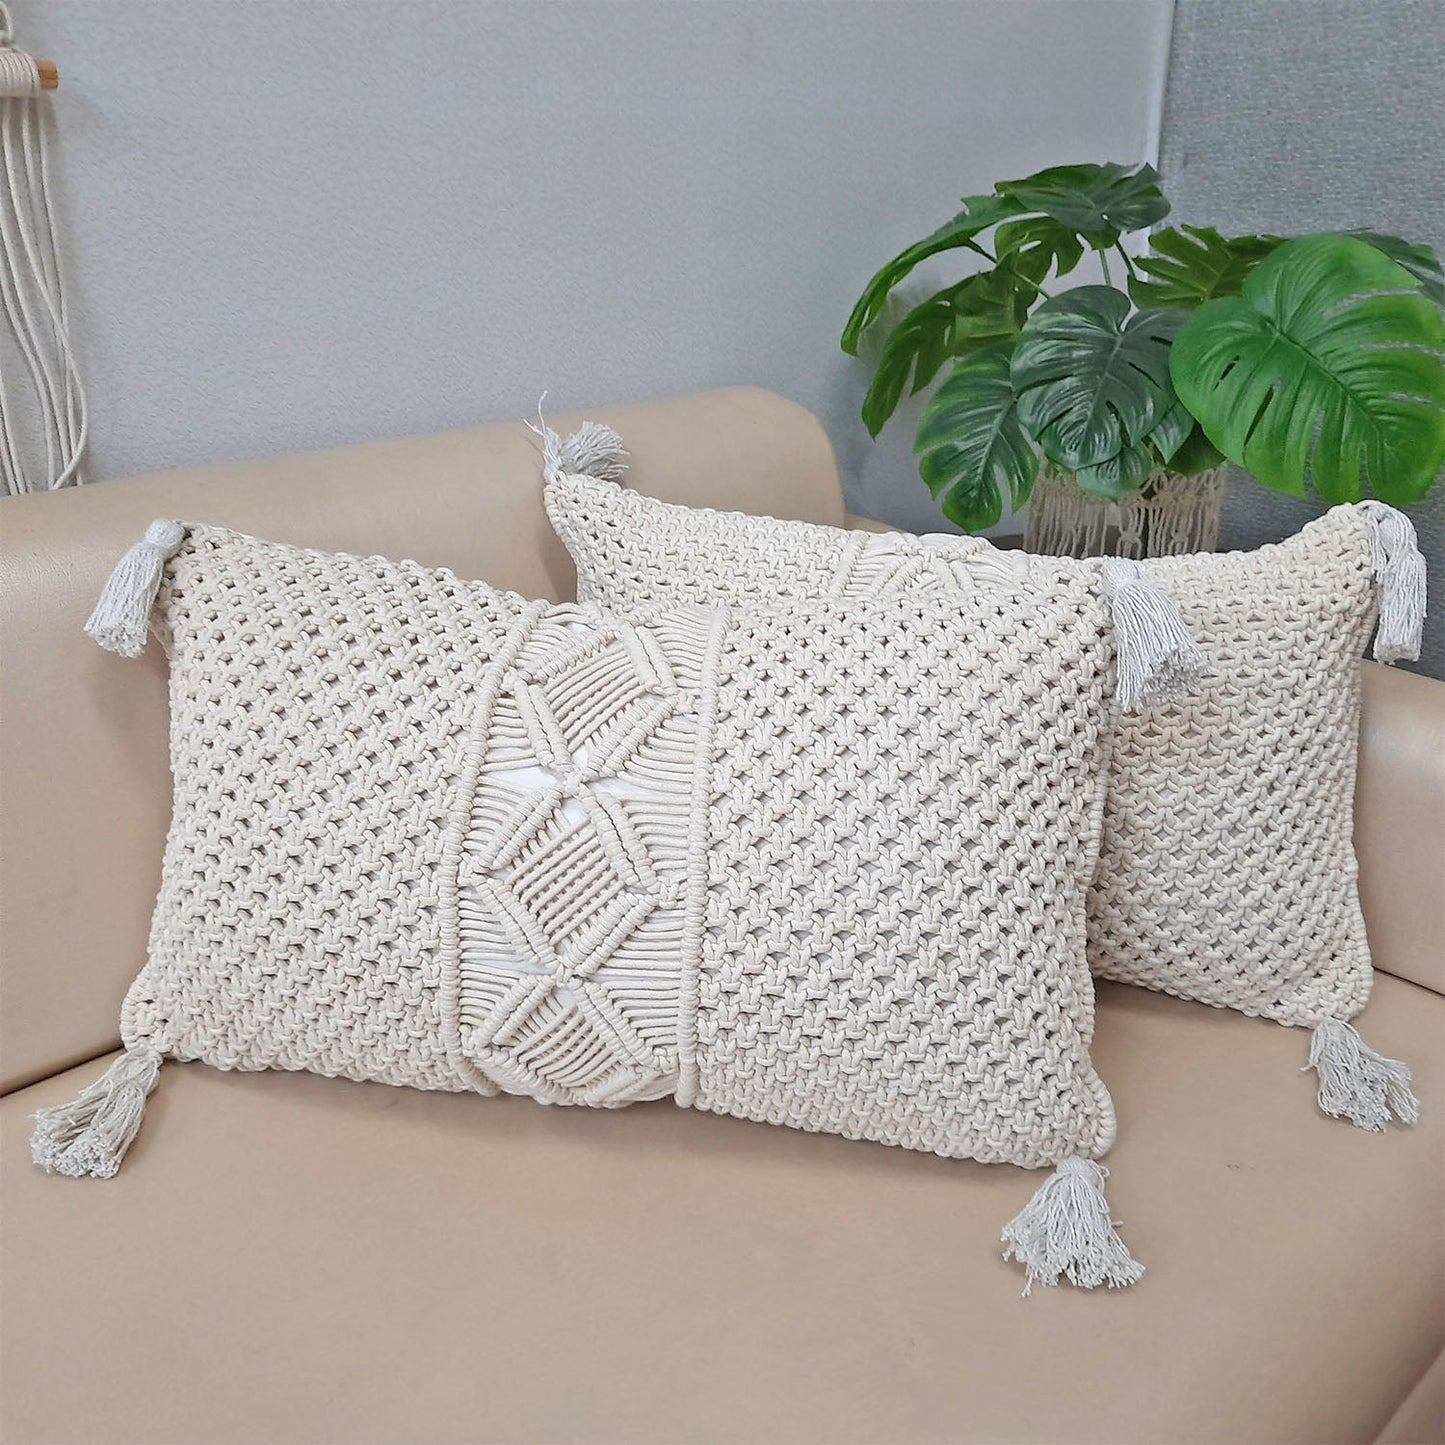 Bohemian Style Hand Knotted Macrame Cushion Covers 100% Bleached Cotton- 16X24 Inch (~40×60 cms) -Set of Two